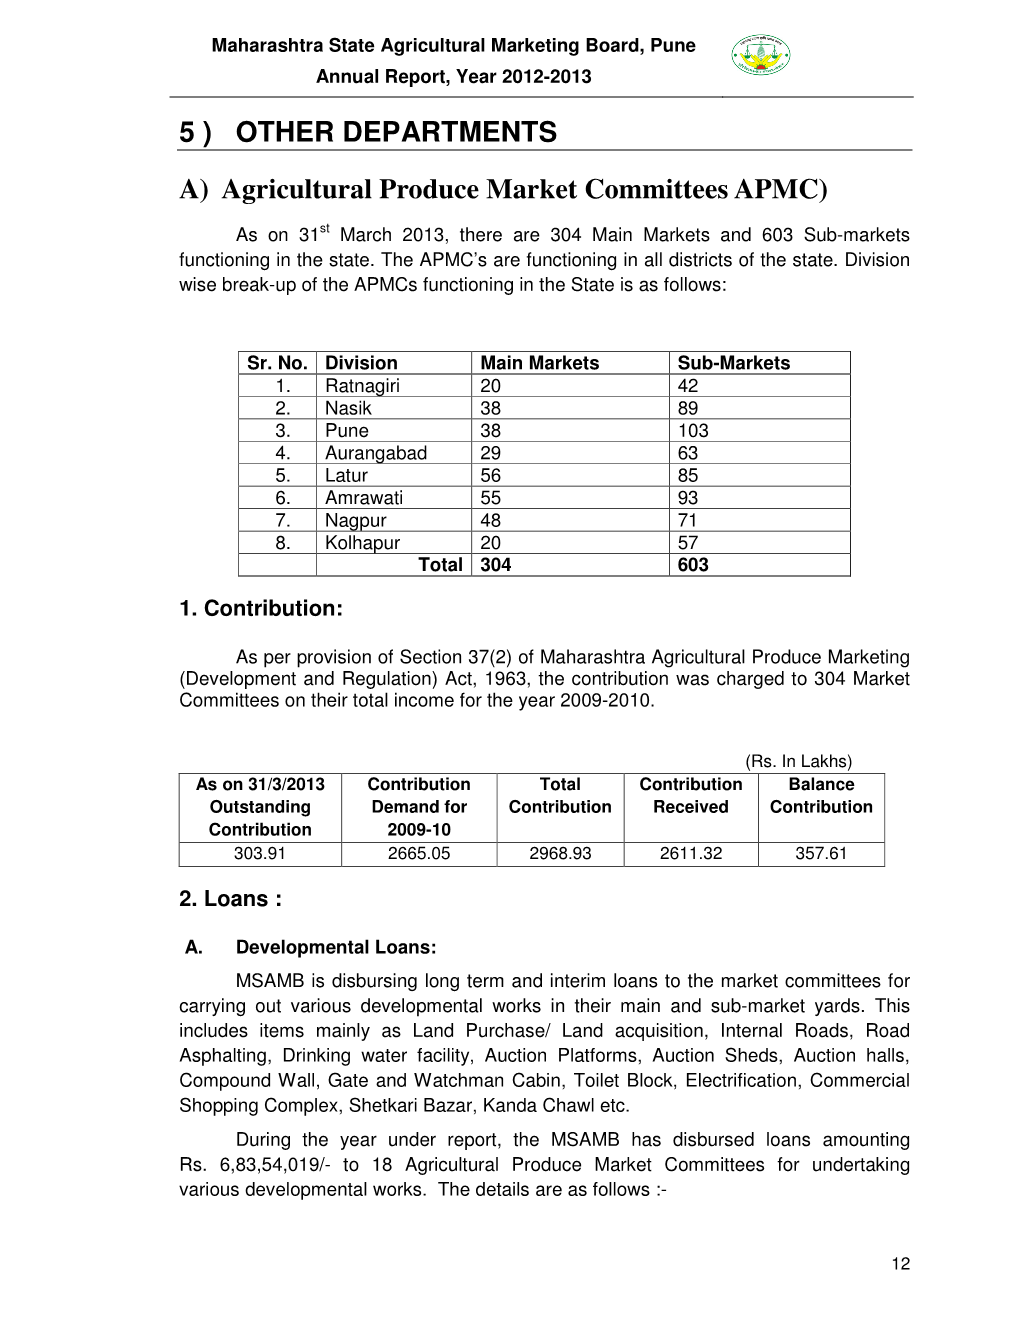 5 ) OTHER DEPARTMENTS A) Agricultural Produce Market Committees APMC